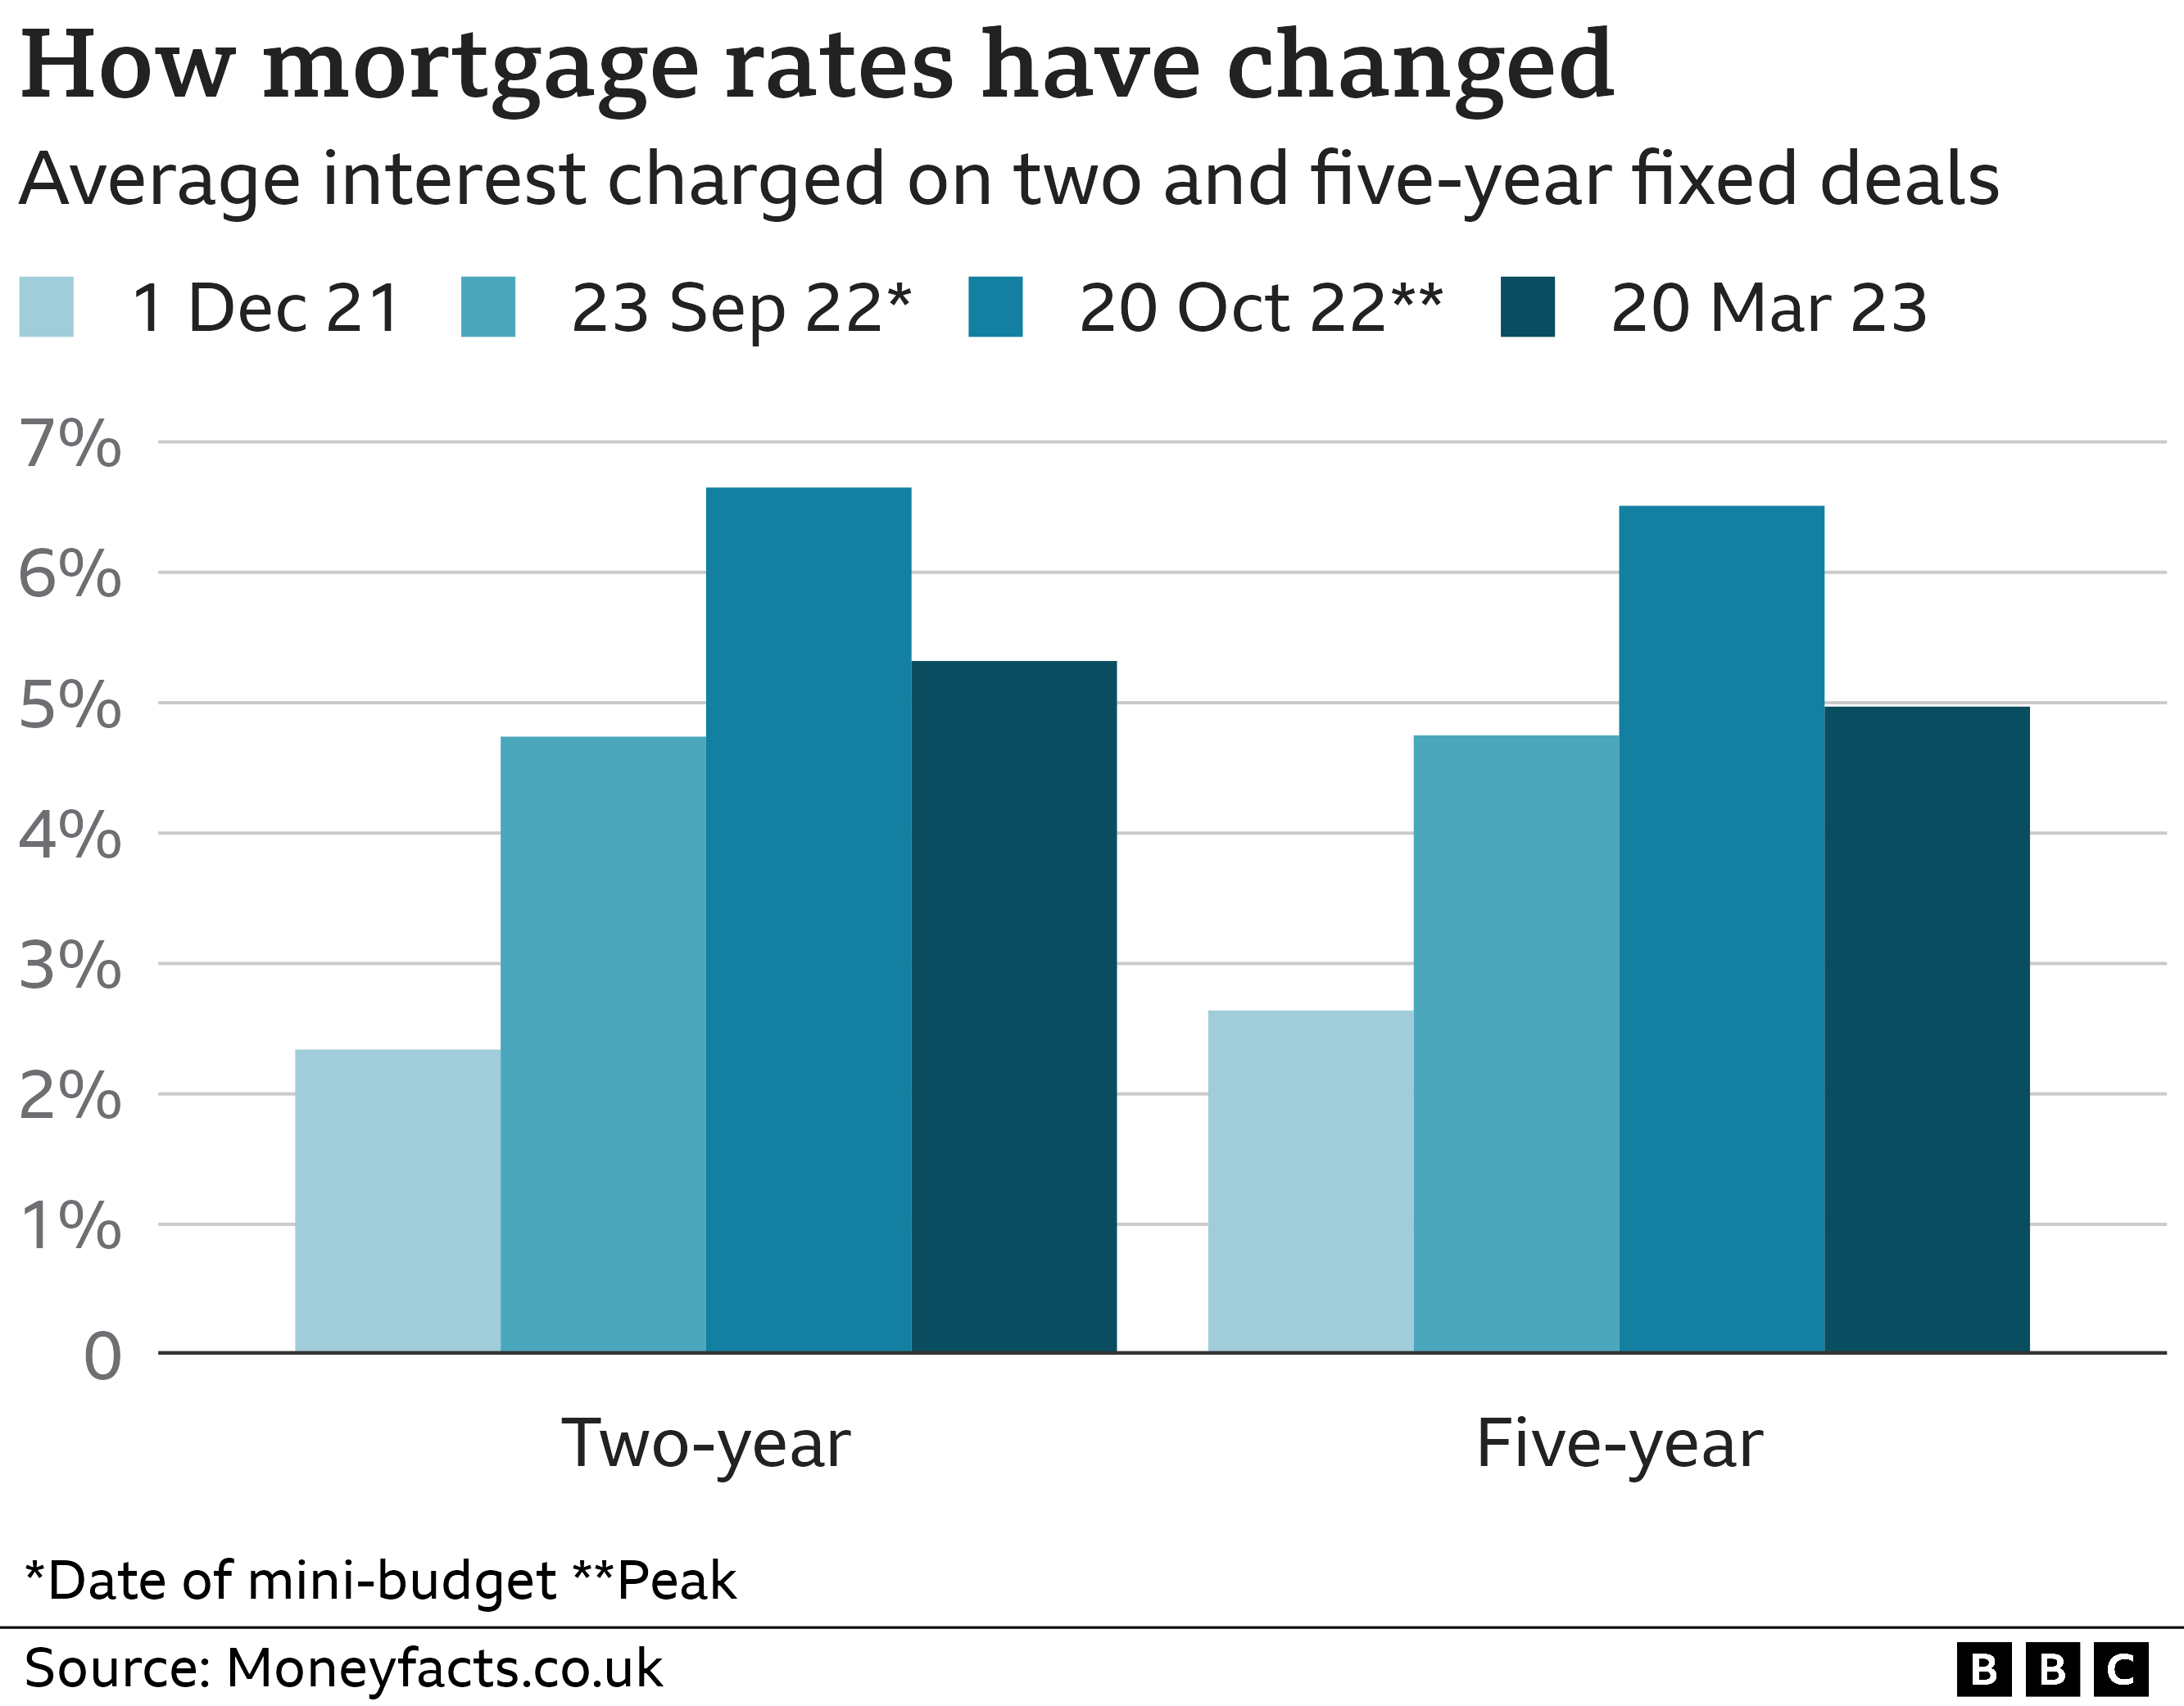 Chart showing how the average interest charged on fixed-rate mortgage deals has changed from 2.34% for a two-year deal in December 2021, to 4.74% on 23 September 2022 (the mini-budget), to a peak of 6.65% on 20 October 2022 and falling to 5.32% on 20 March 2023 - the figures for five-year deals were 2.64%, 4.75%, 6.51% and 4.97%